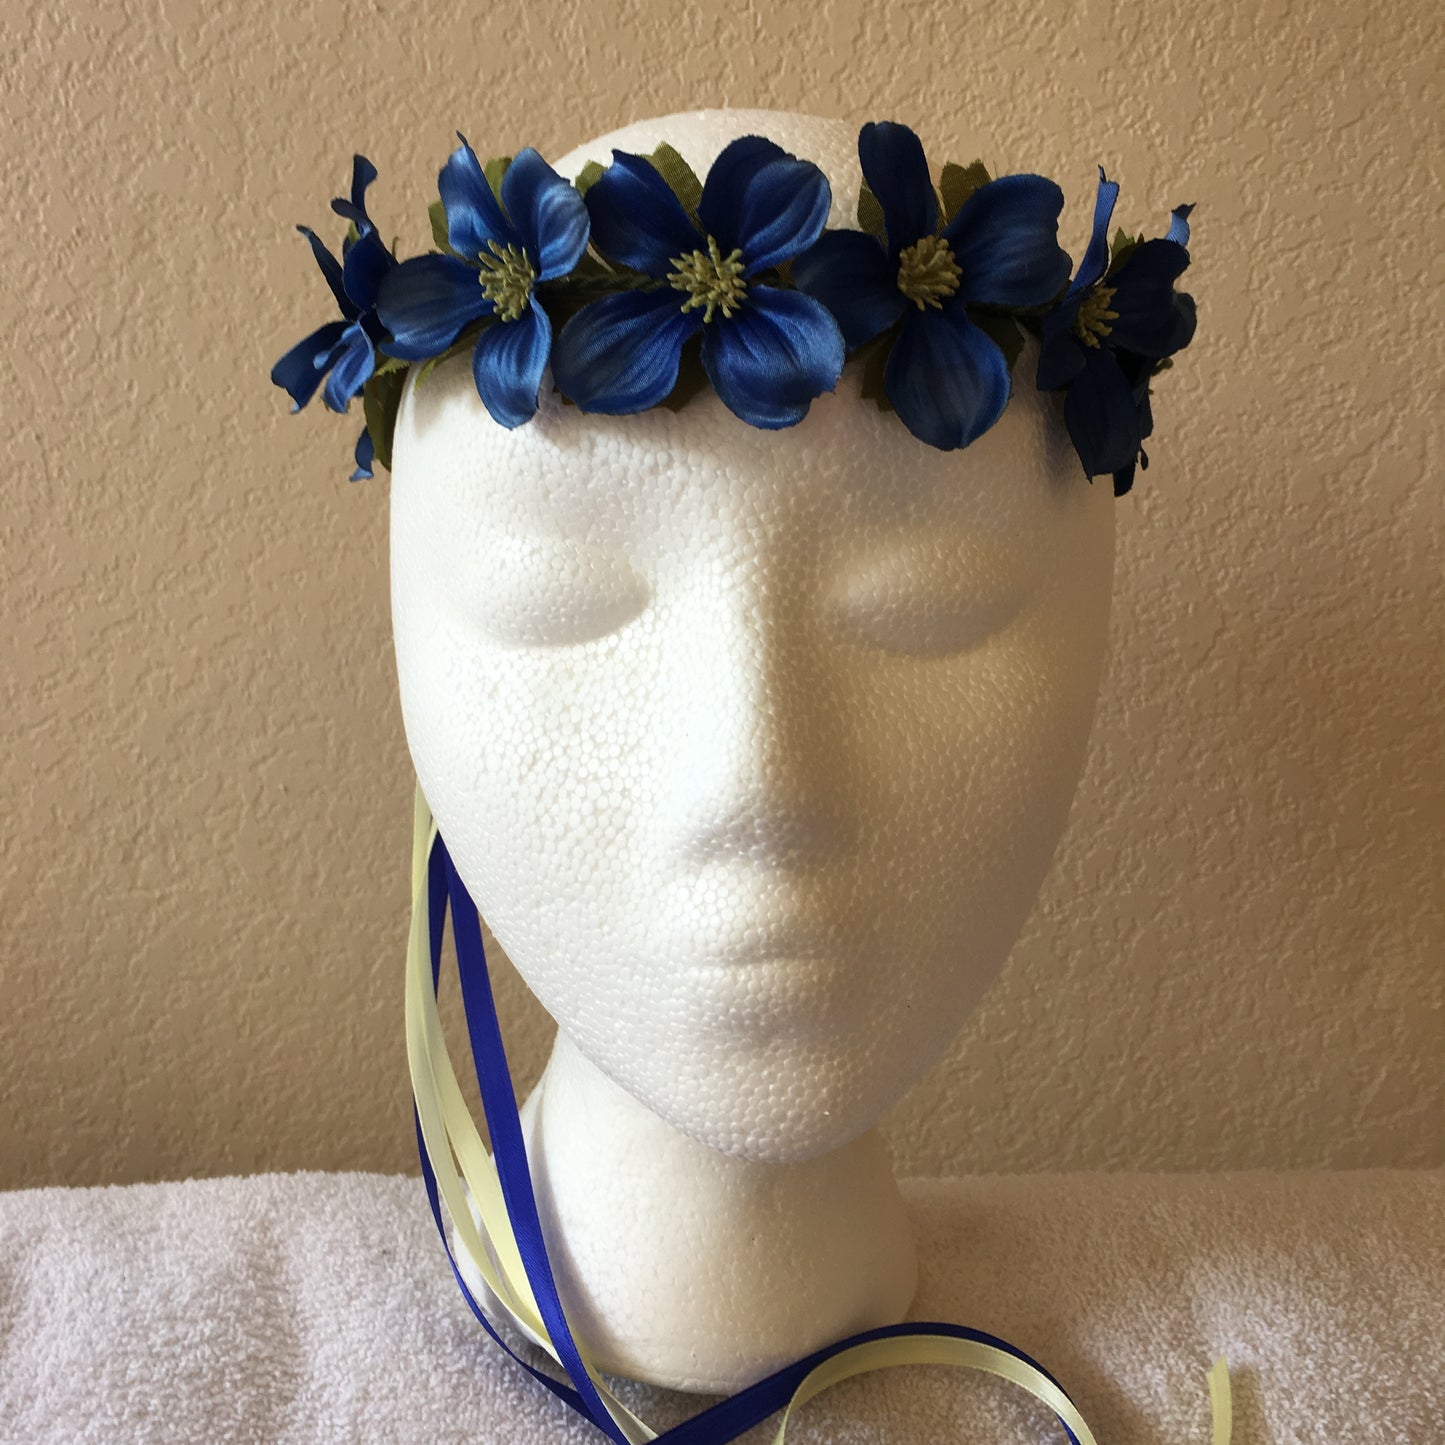 Extra Small Wreath – Blue flowers w/ yellow centers +